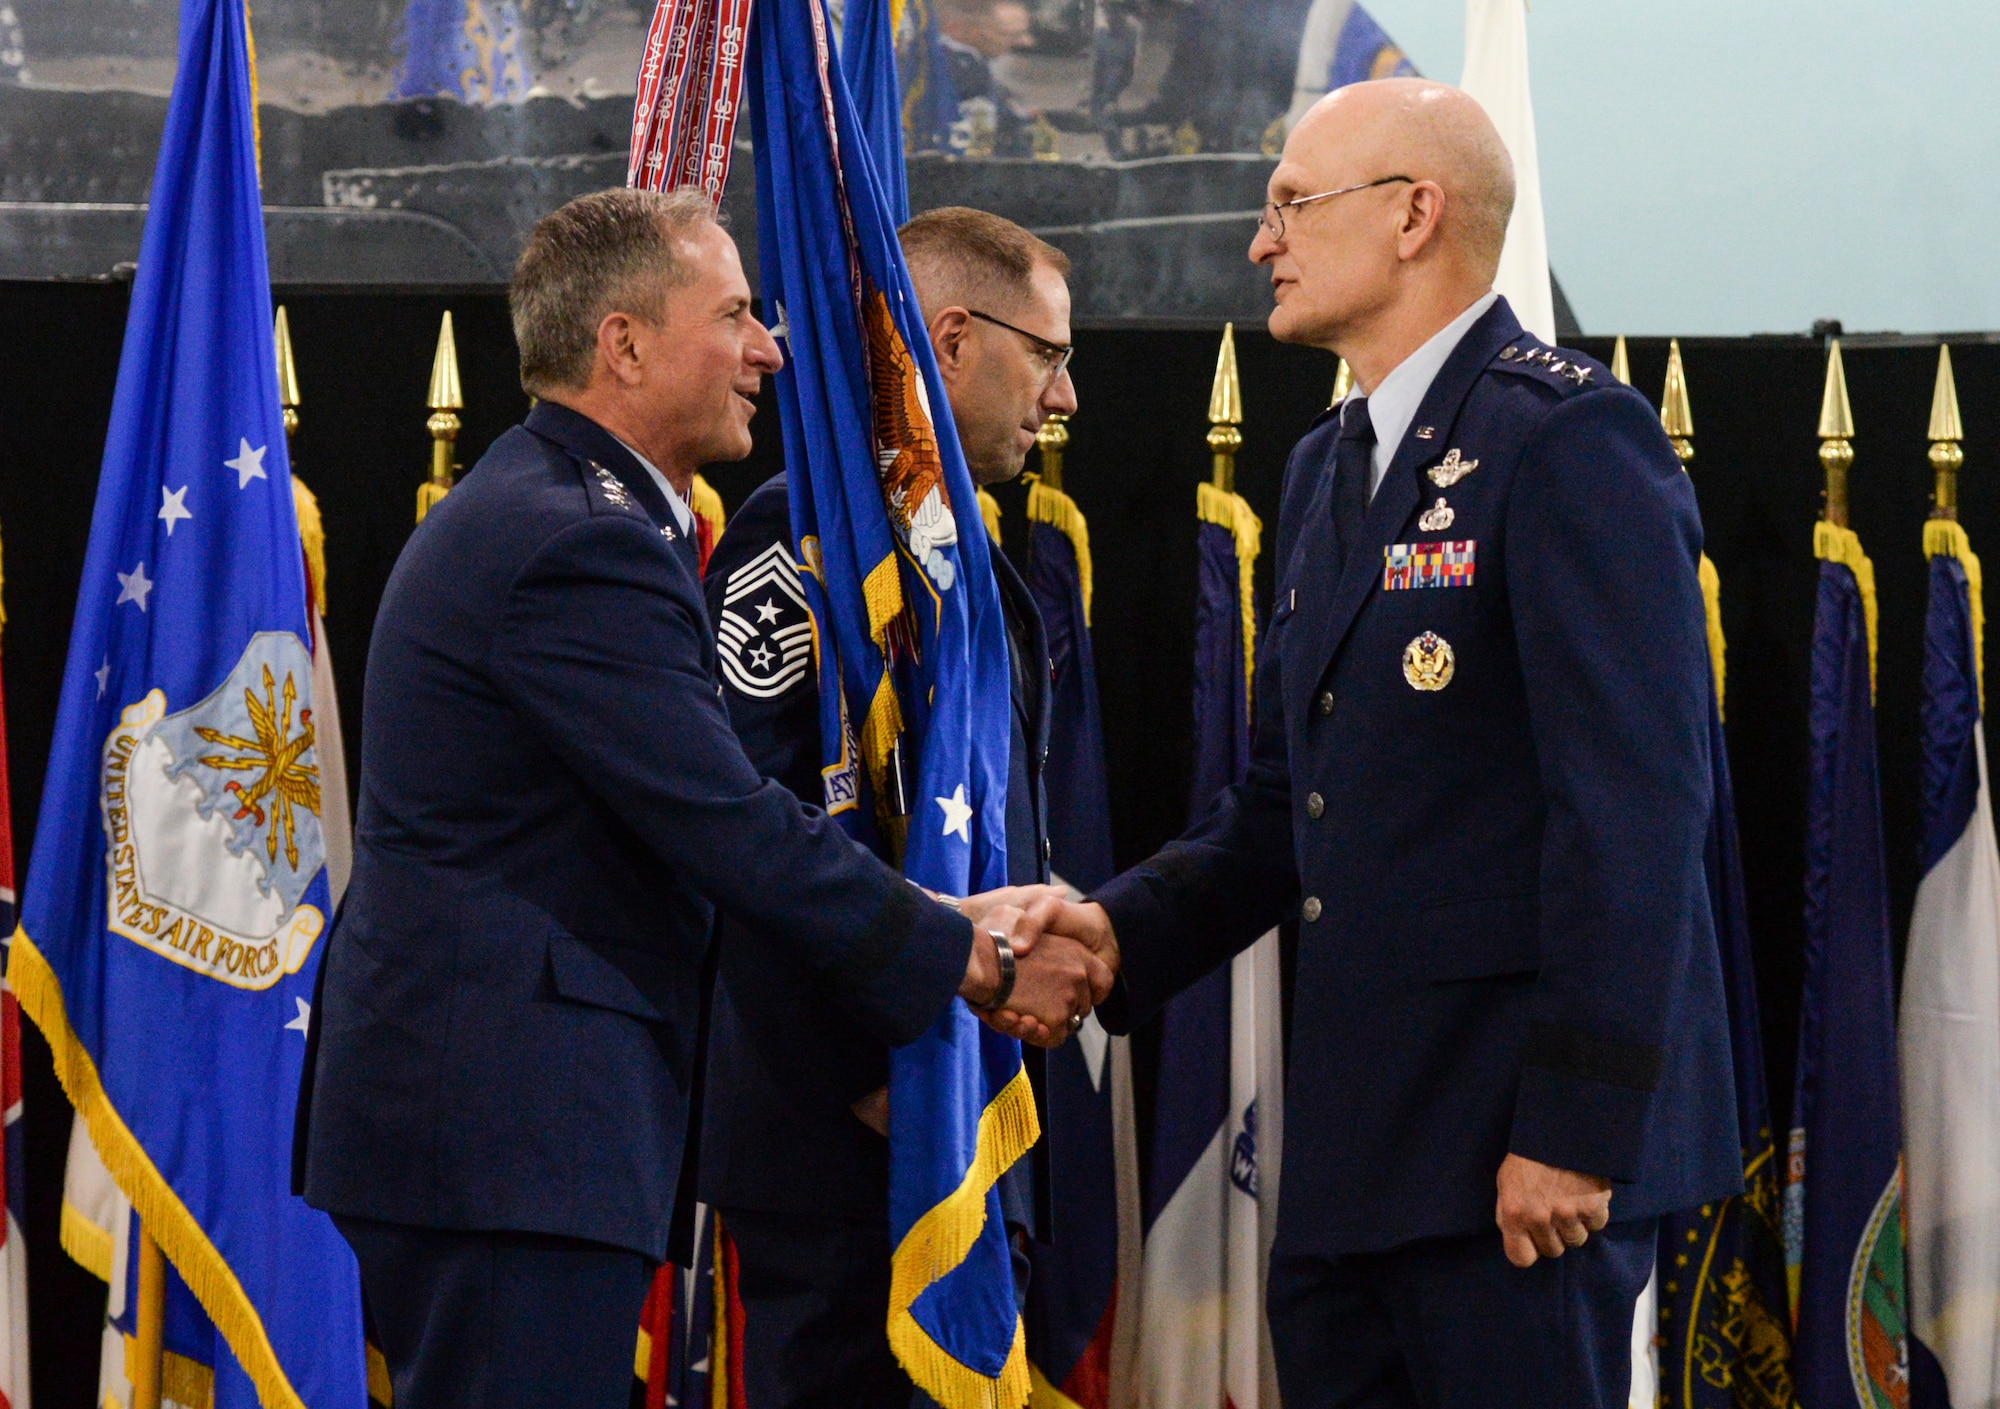 Air Force Chief of Staff Gen. David L. Goldfein congratulates Gen. Arnold W. Bunch, Jr. after assuming command of Air Force Materiel Command commander, shake hands during an assumption of command ceremony inside the National Museum of the United States Air Force, Wright-Patterson Air Force Base, Ohio, May 31, 2019. AFMC manages the research, development, acquisition, test and logistics services that keep Air Force weapon systems and warfighters ready for combat. (U.S. Air Force photo by Wesley Farnsworth)